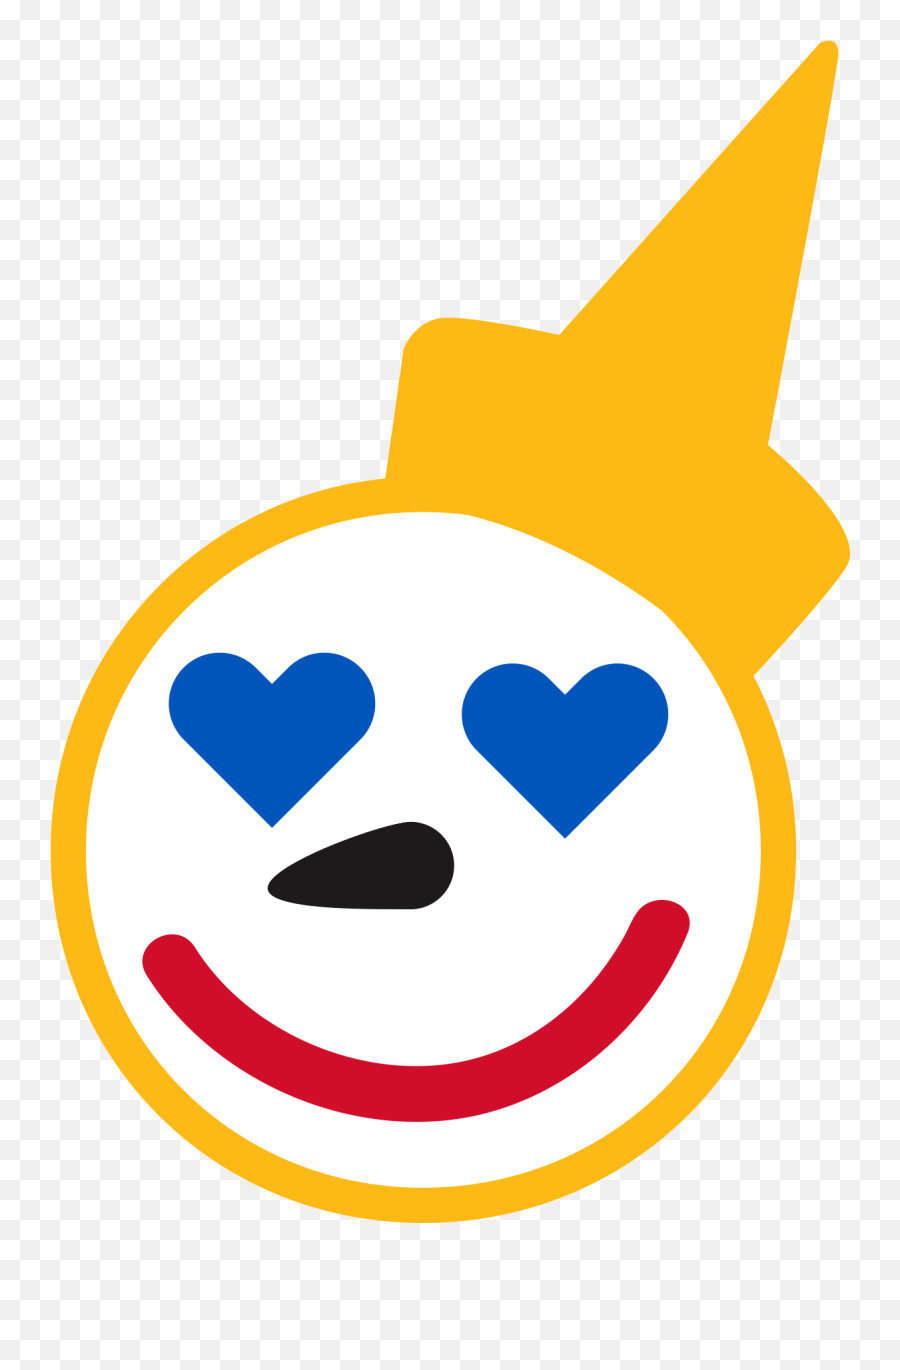 Jacks Two Truths And One Lie - Transparent Jack In The Box Png Emoji,Jack In The Box Logo